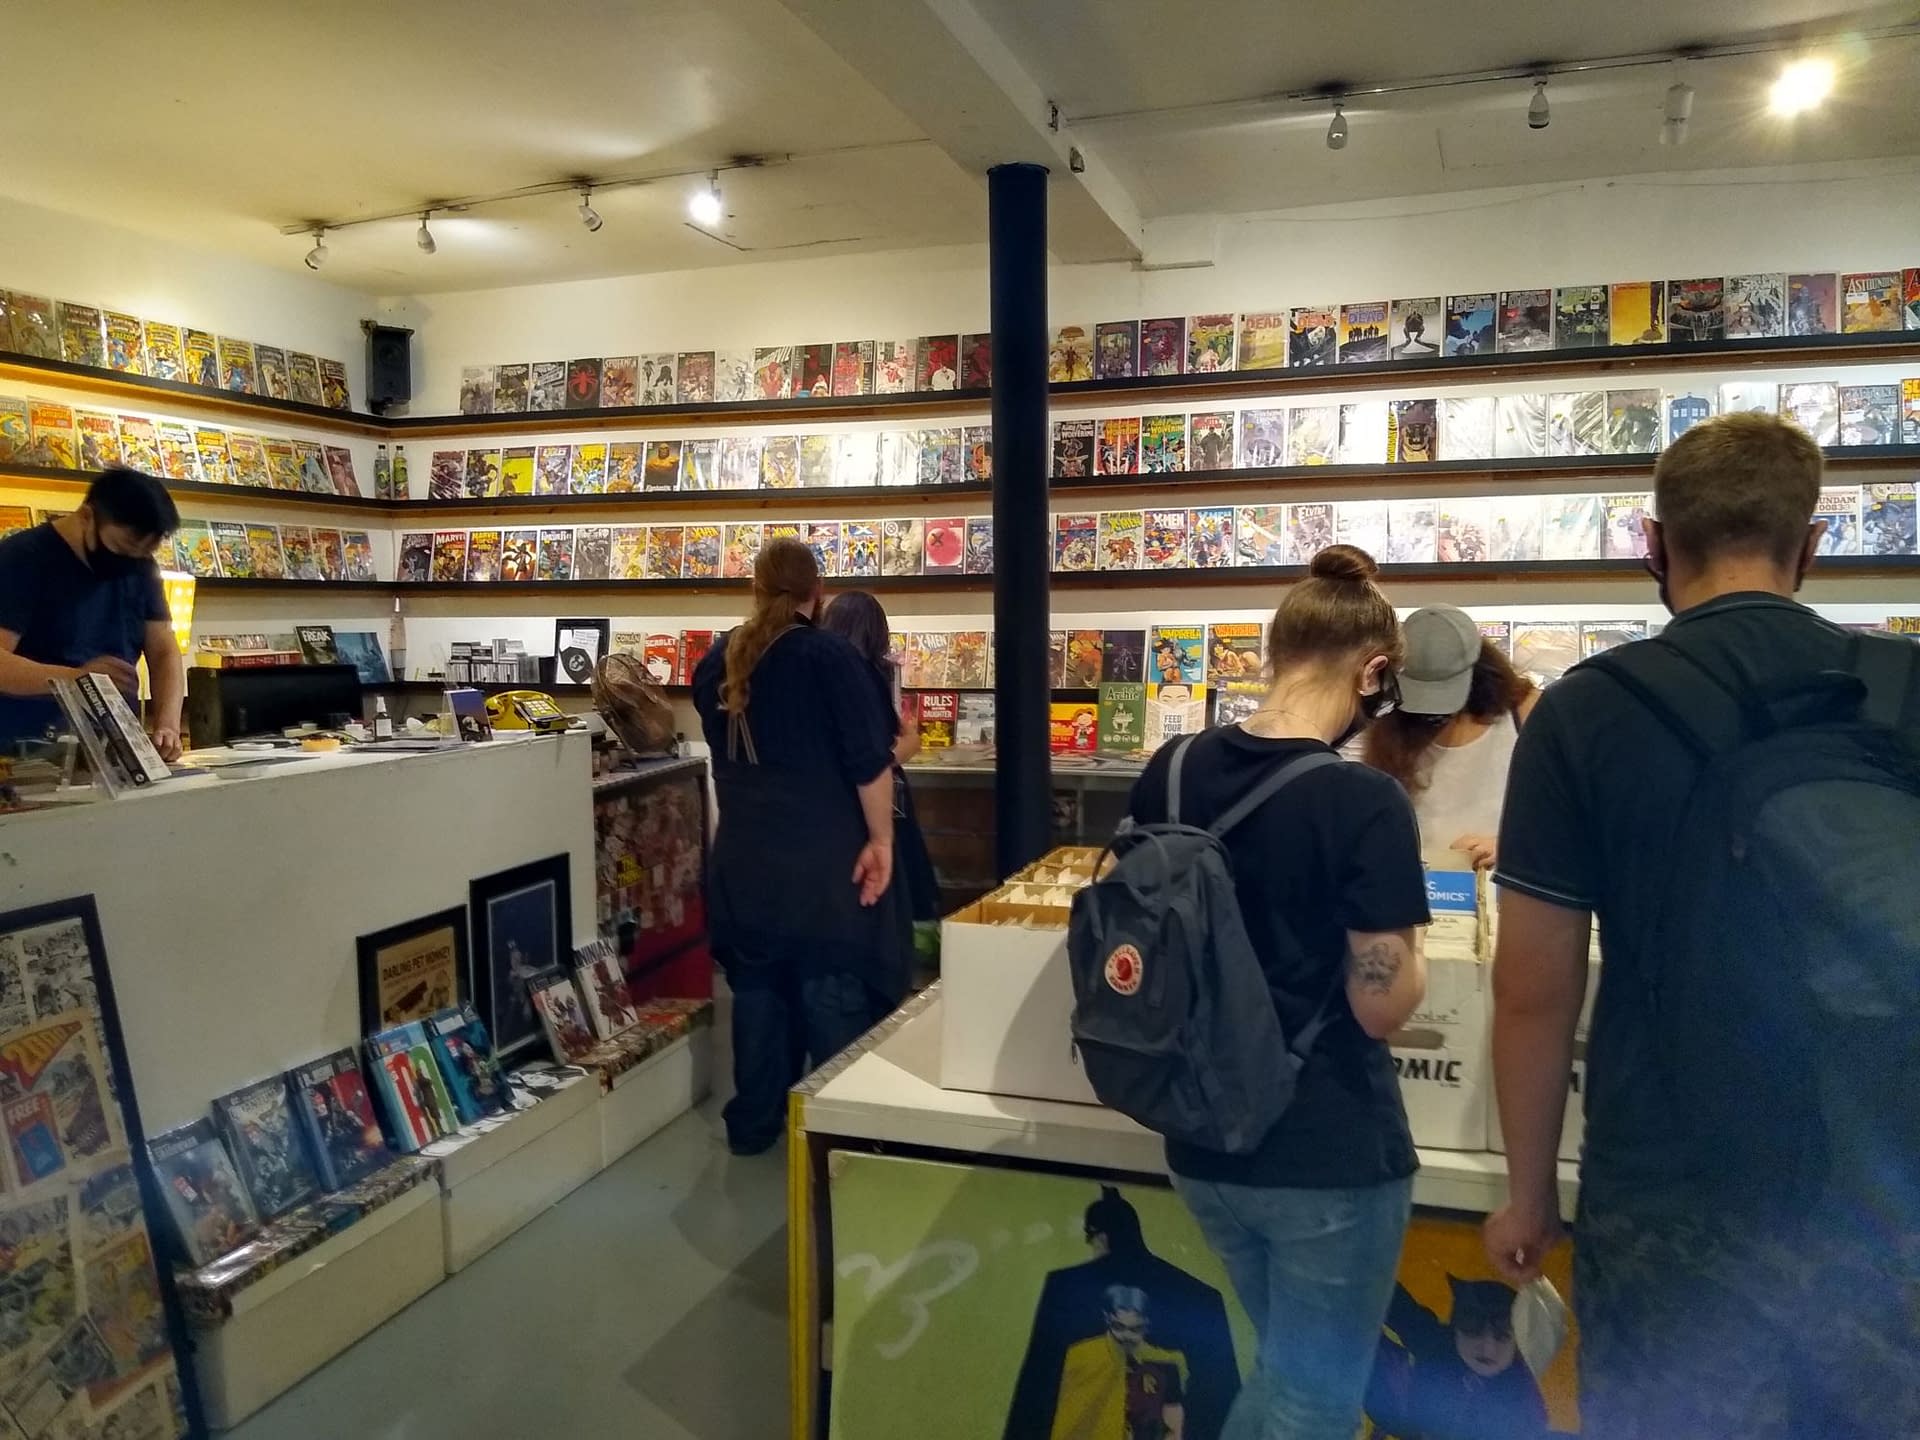 SPACE - A New Name For Orbital Comics In London